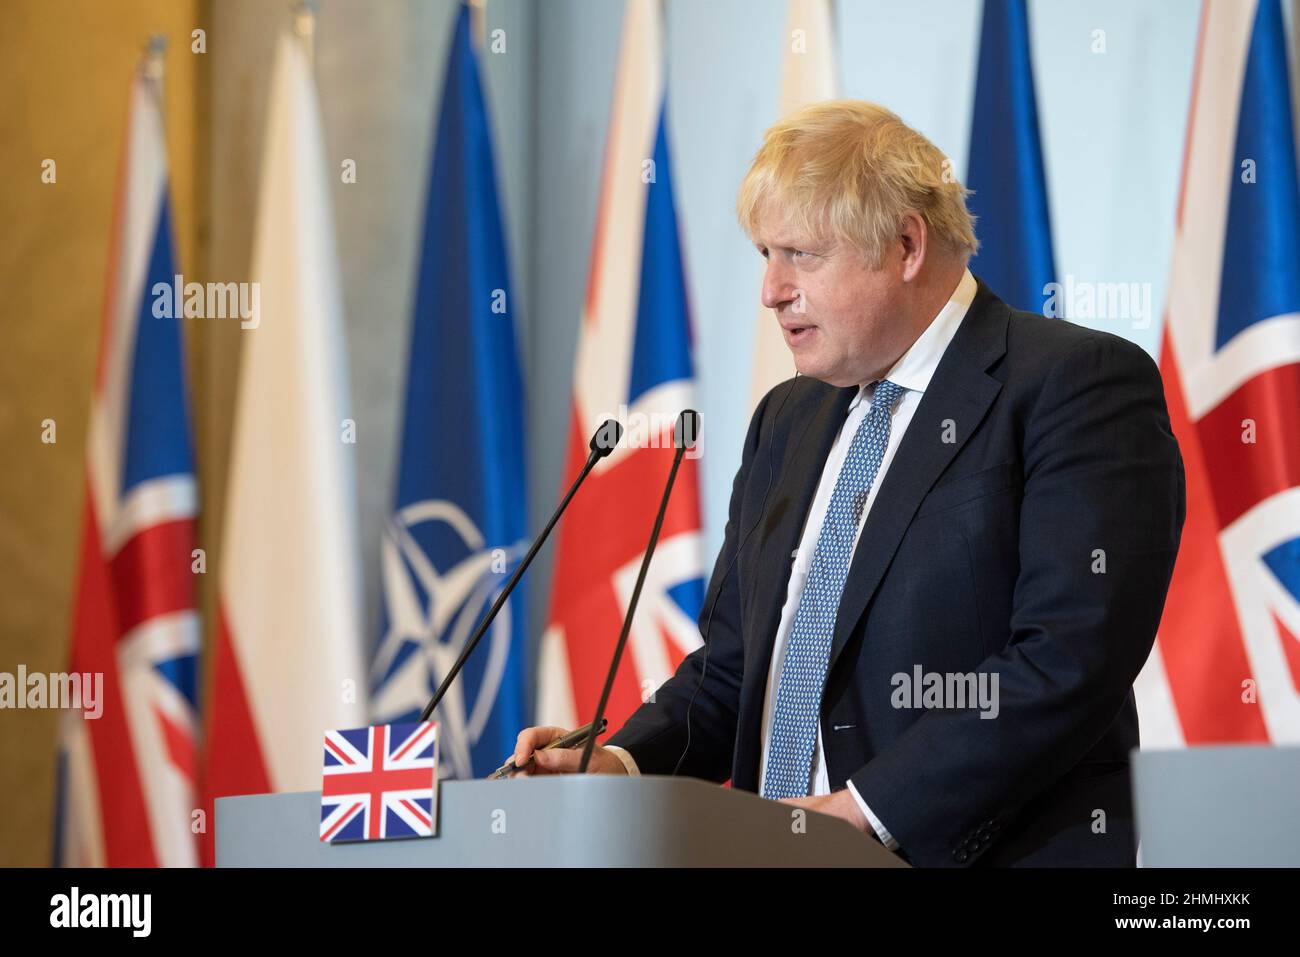 Warsaw, Warsaw, Poland. 10th Feb, 2022. British Prime Minister BORIS JOHNSON is seen during a meeting held in the chancellery of the Prime Minister of Poland on February 10, 2022 in Warsaw, Poland. The British Prime Minister Borish Johnson met Polish Prime Minister Mateusz Morawiecki to discuss about security in eastern Europe and Russian military build up on the border with Ukraine. Credit: ZUMA Press, Inc./Alamy Live News Stock Photo